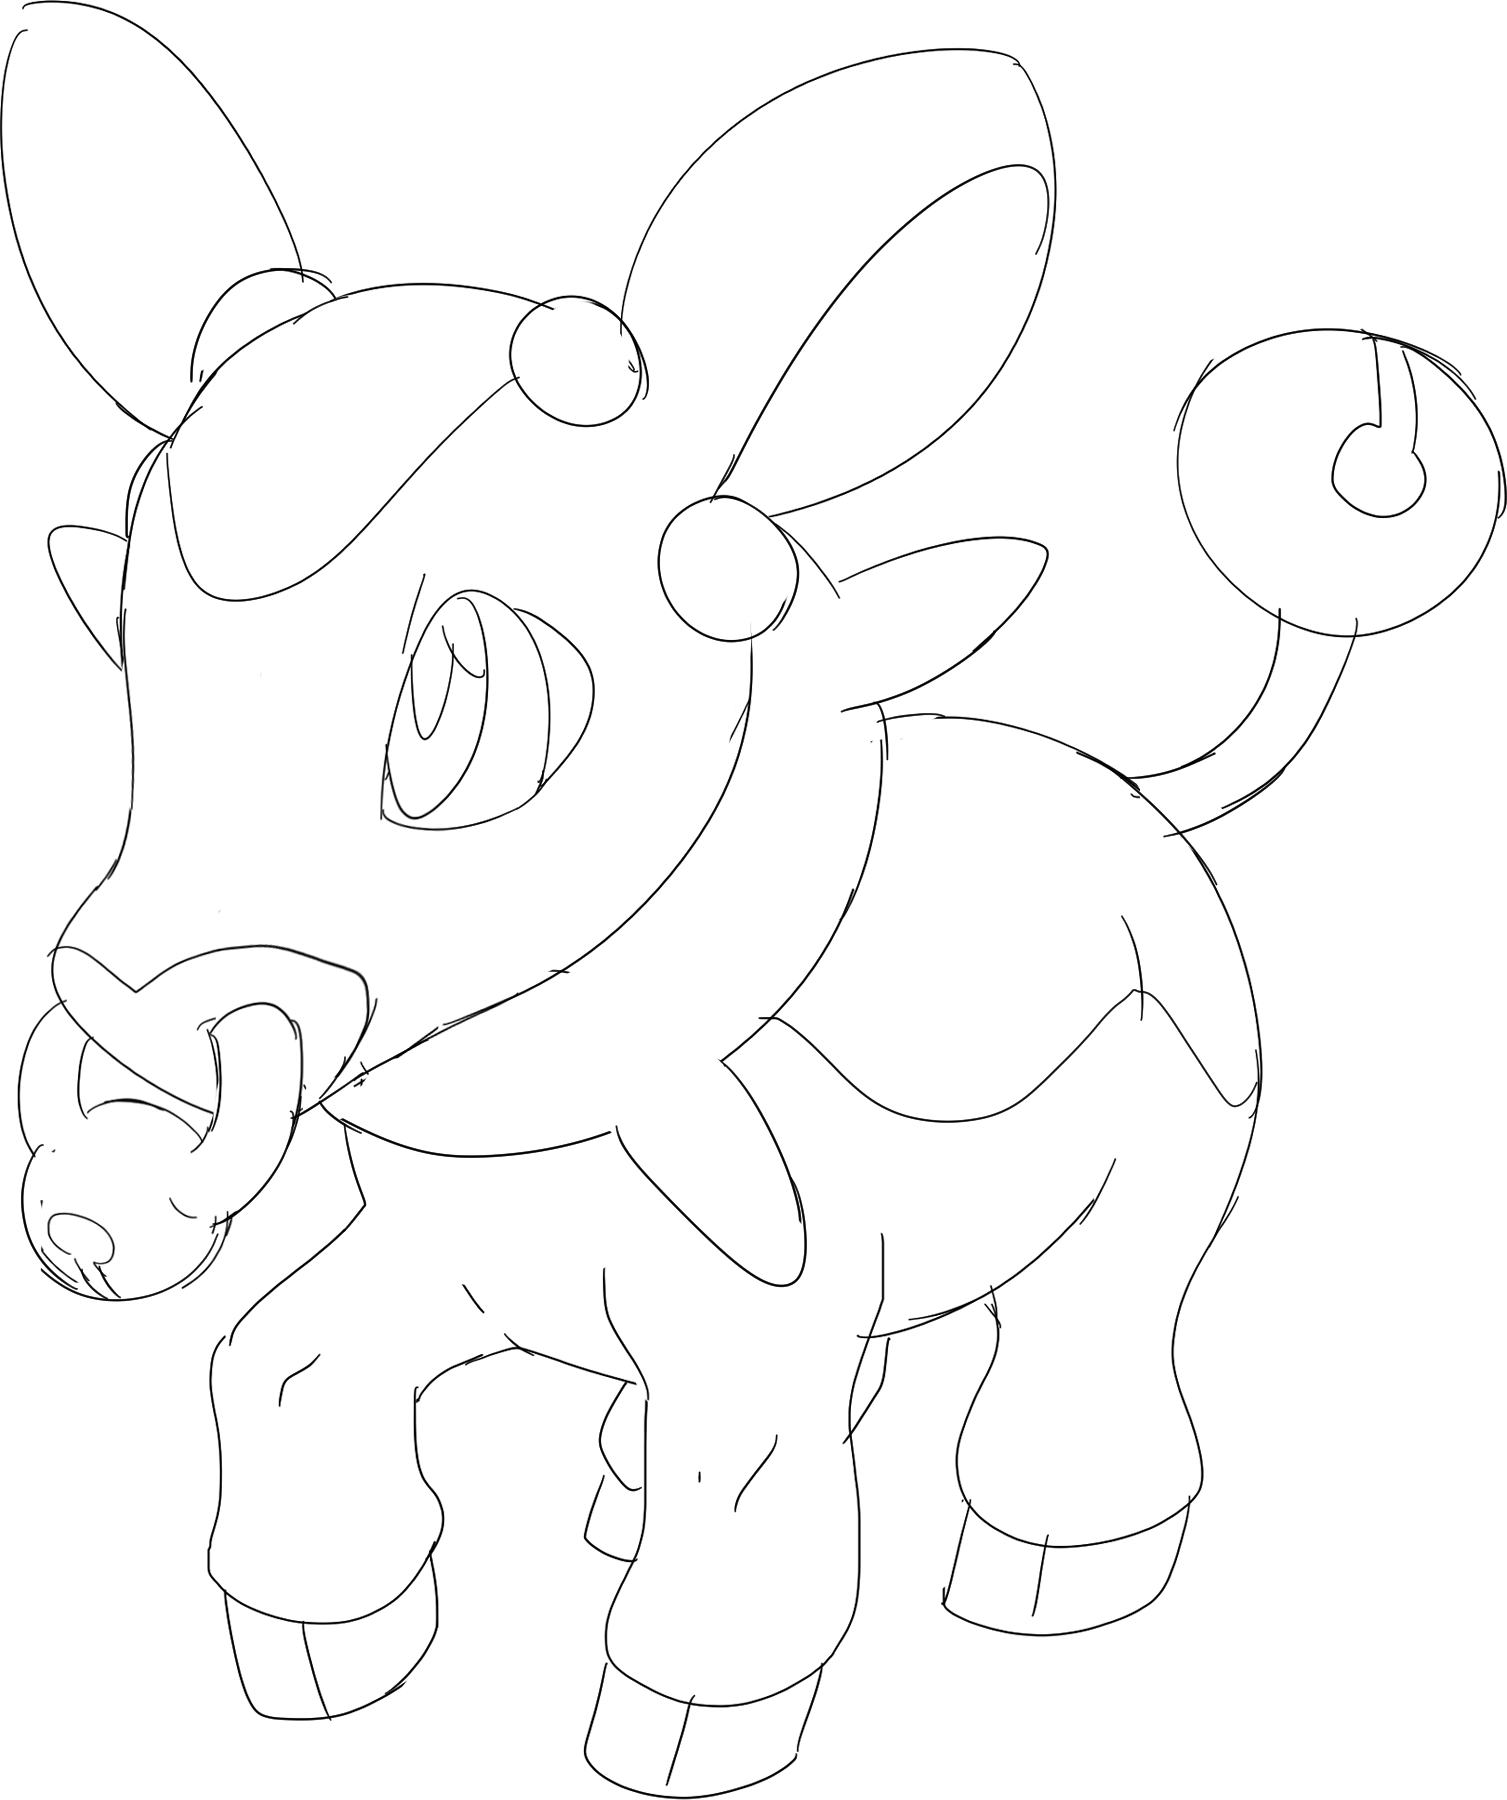 Segamastergirl on x which cow fakemon appeals to you the most pollâï httpstcofbqlajqf x